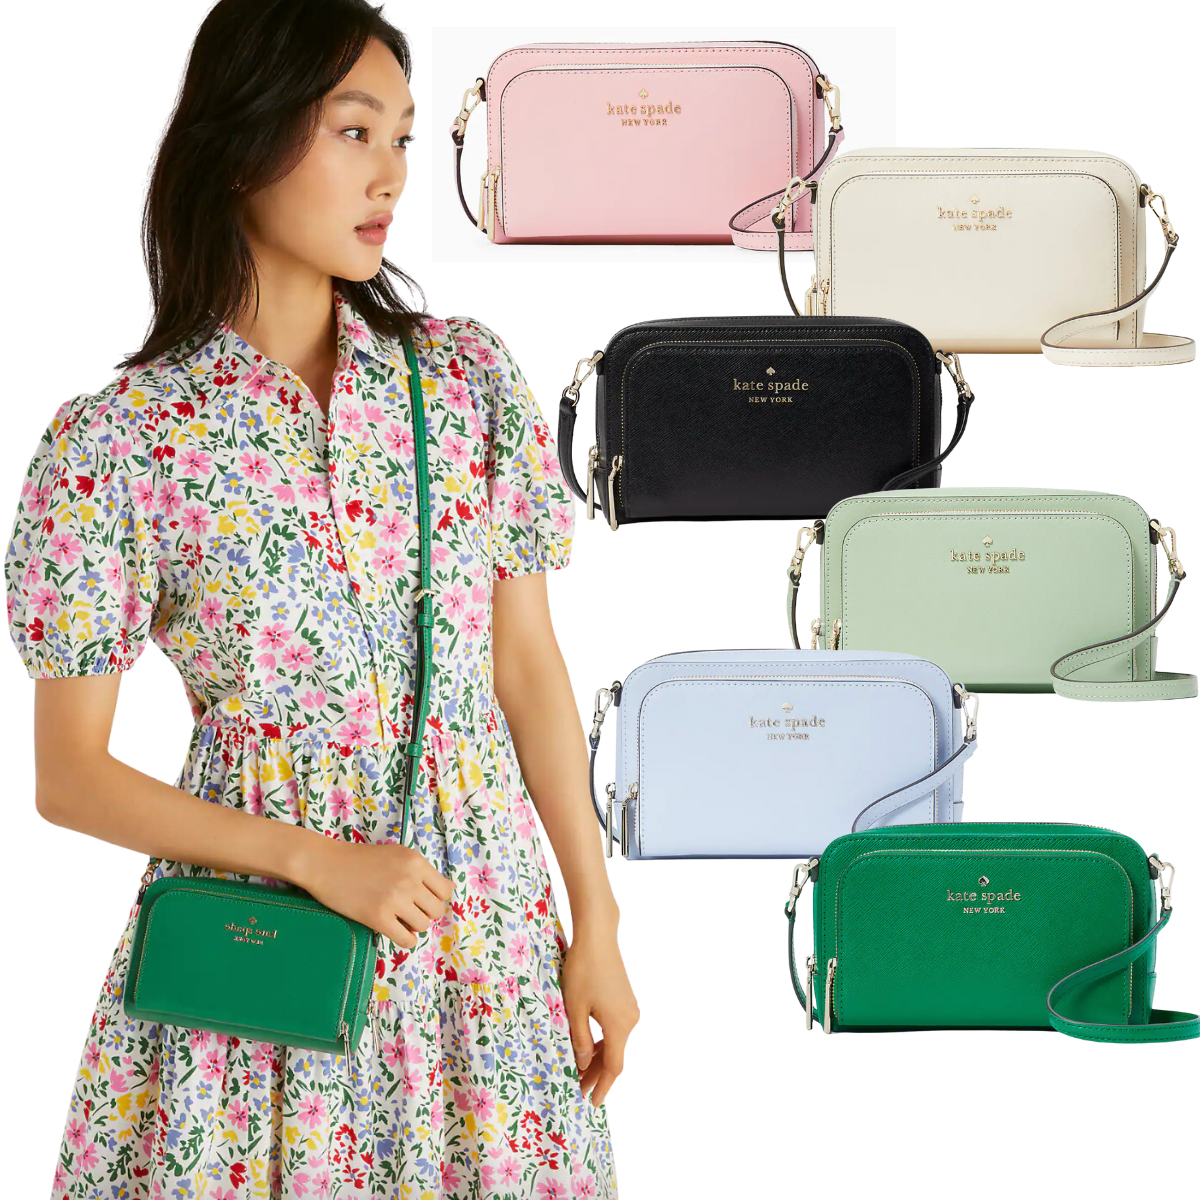 Kate Spade 24-Hour Deal: This $300 Crossbody Bag Is On Sale for $65